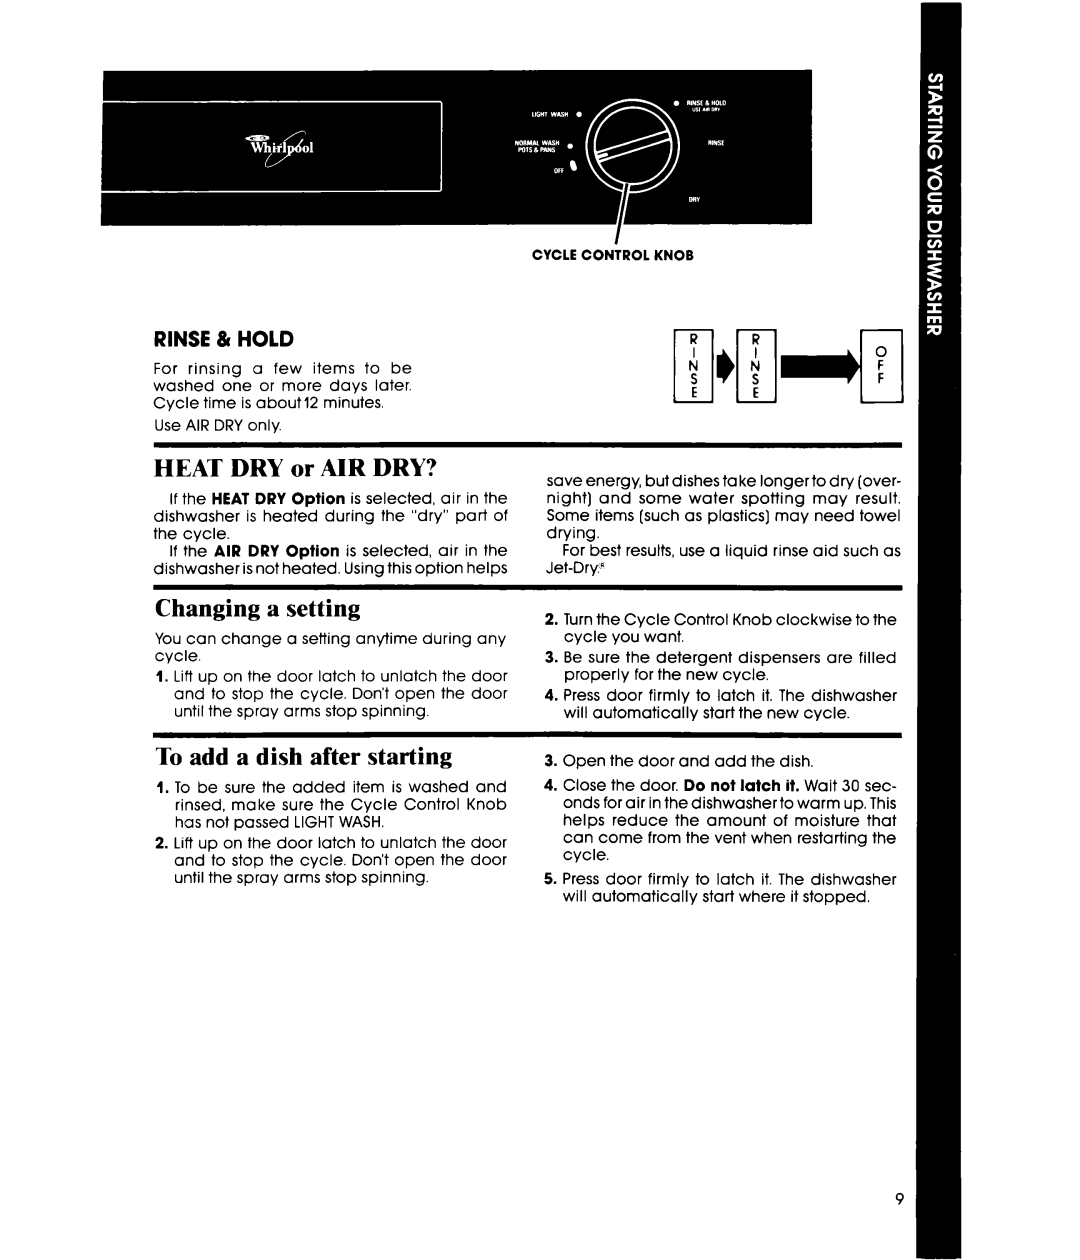 Whirlpool DU8300XT manual HEAT DRY or AIR DRY?, Changing a setting, To add a dish after starting, Rinse & Hold 